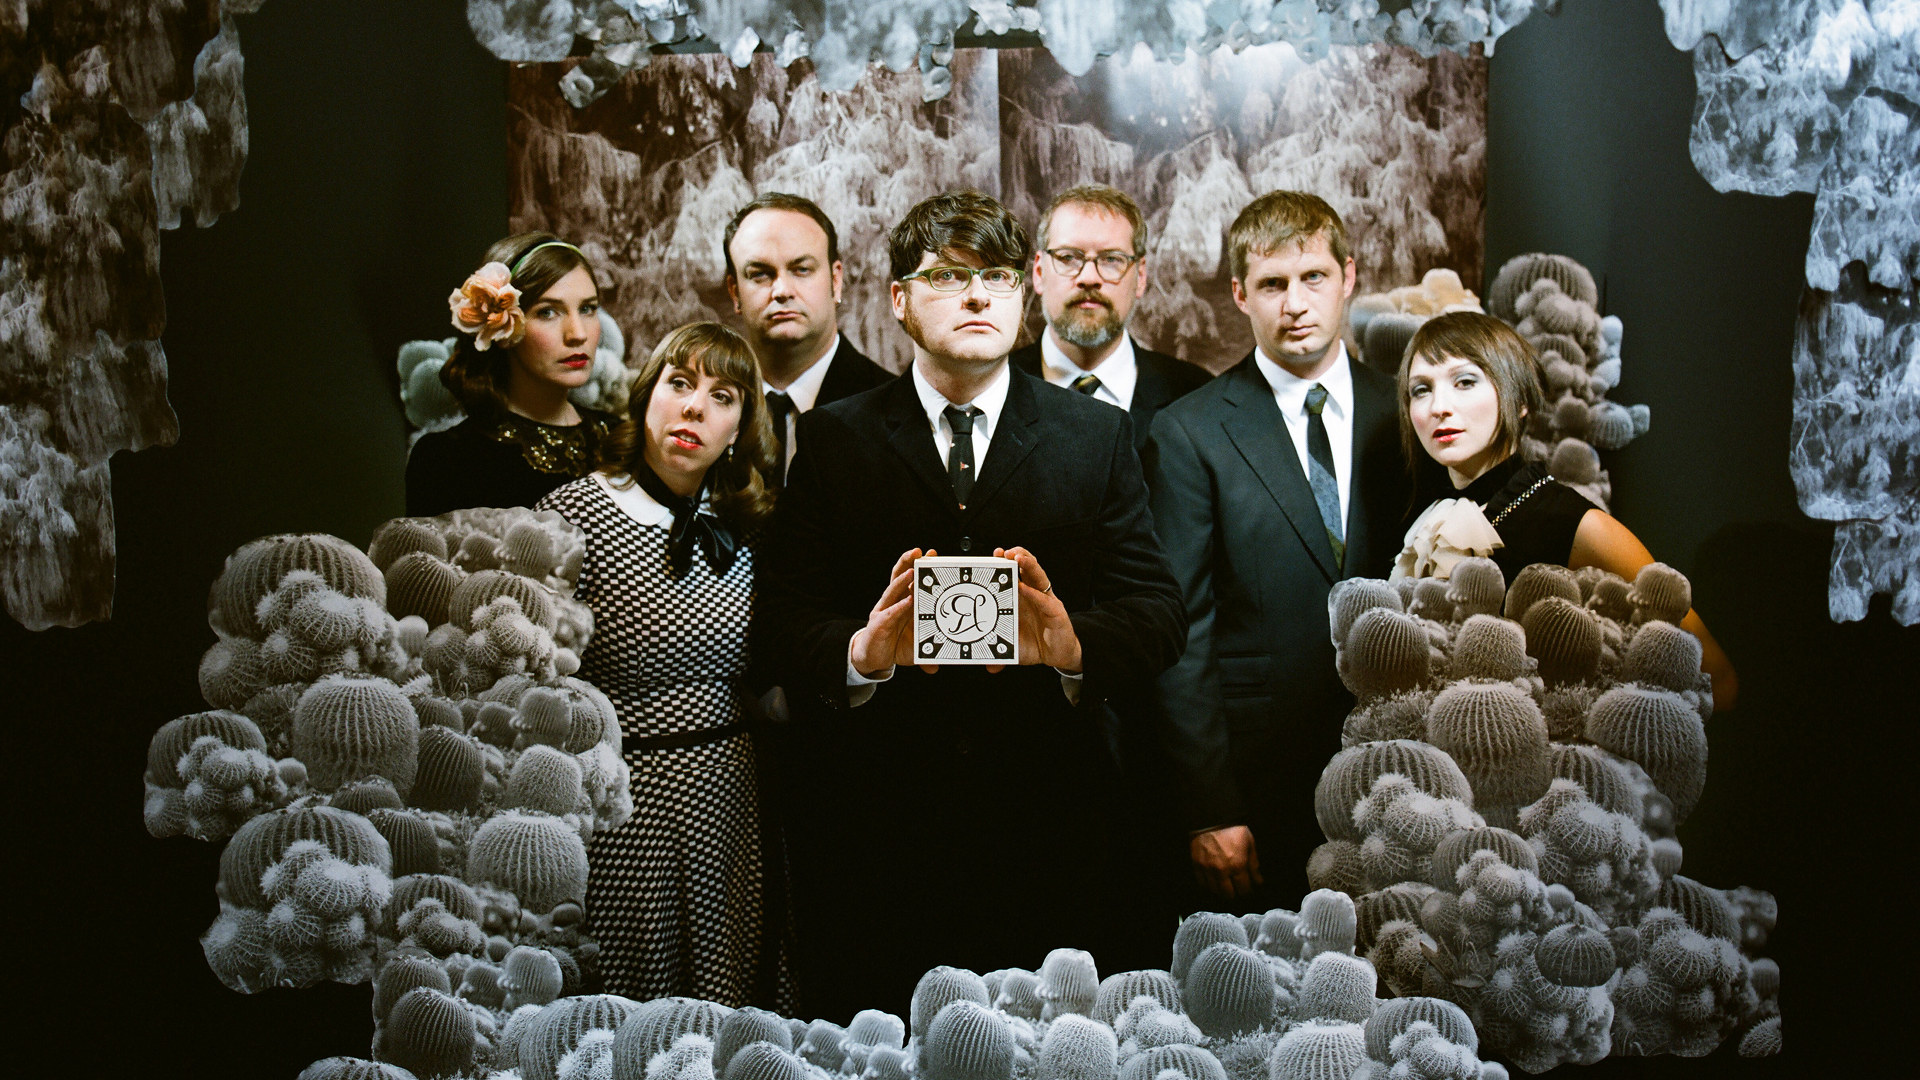 The Decemberists have made their most varied and personal record yet